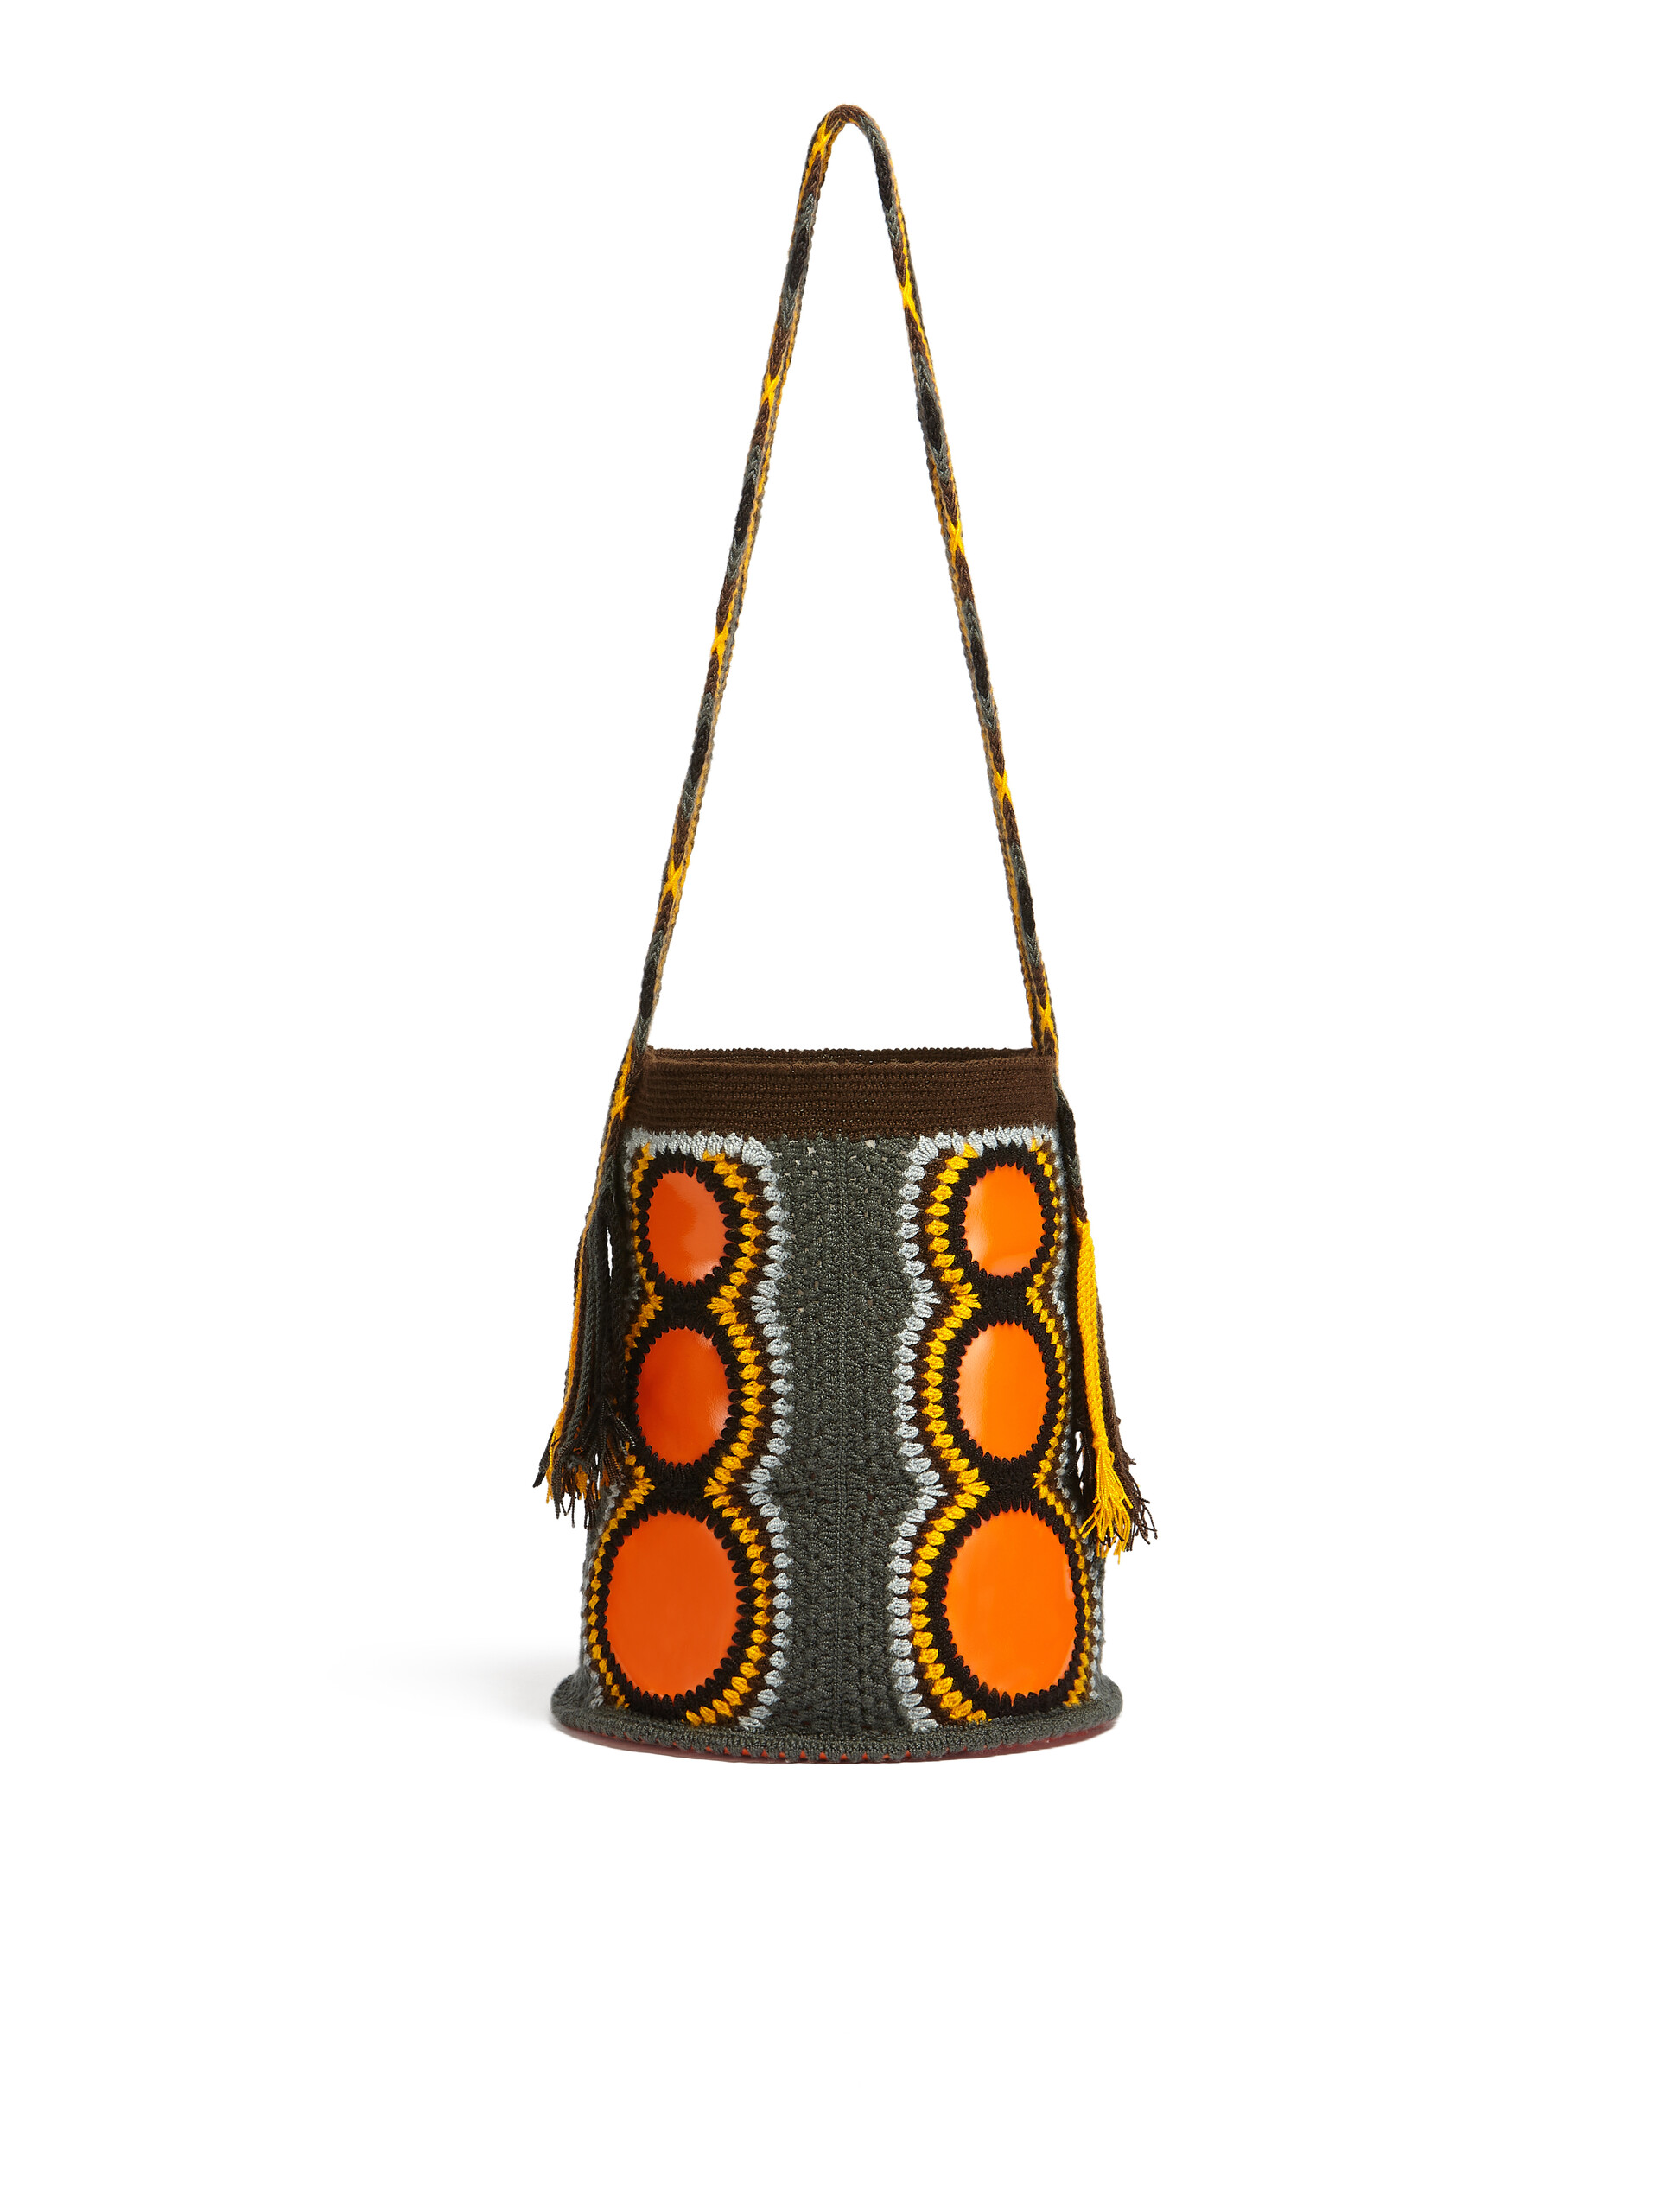 MARNI MARKET bag in green and orange technical wool - Bags - Image 3